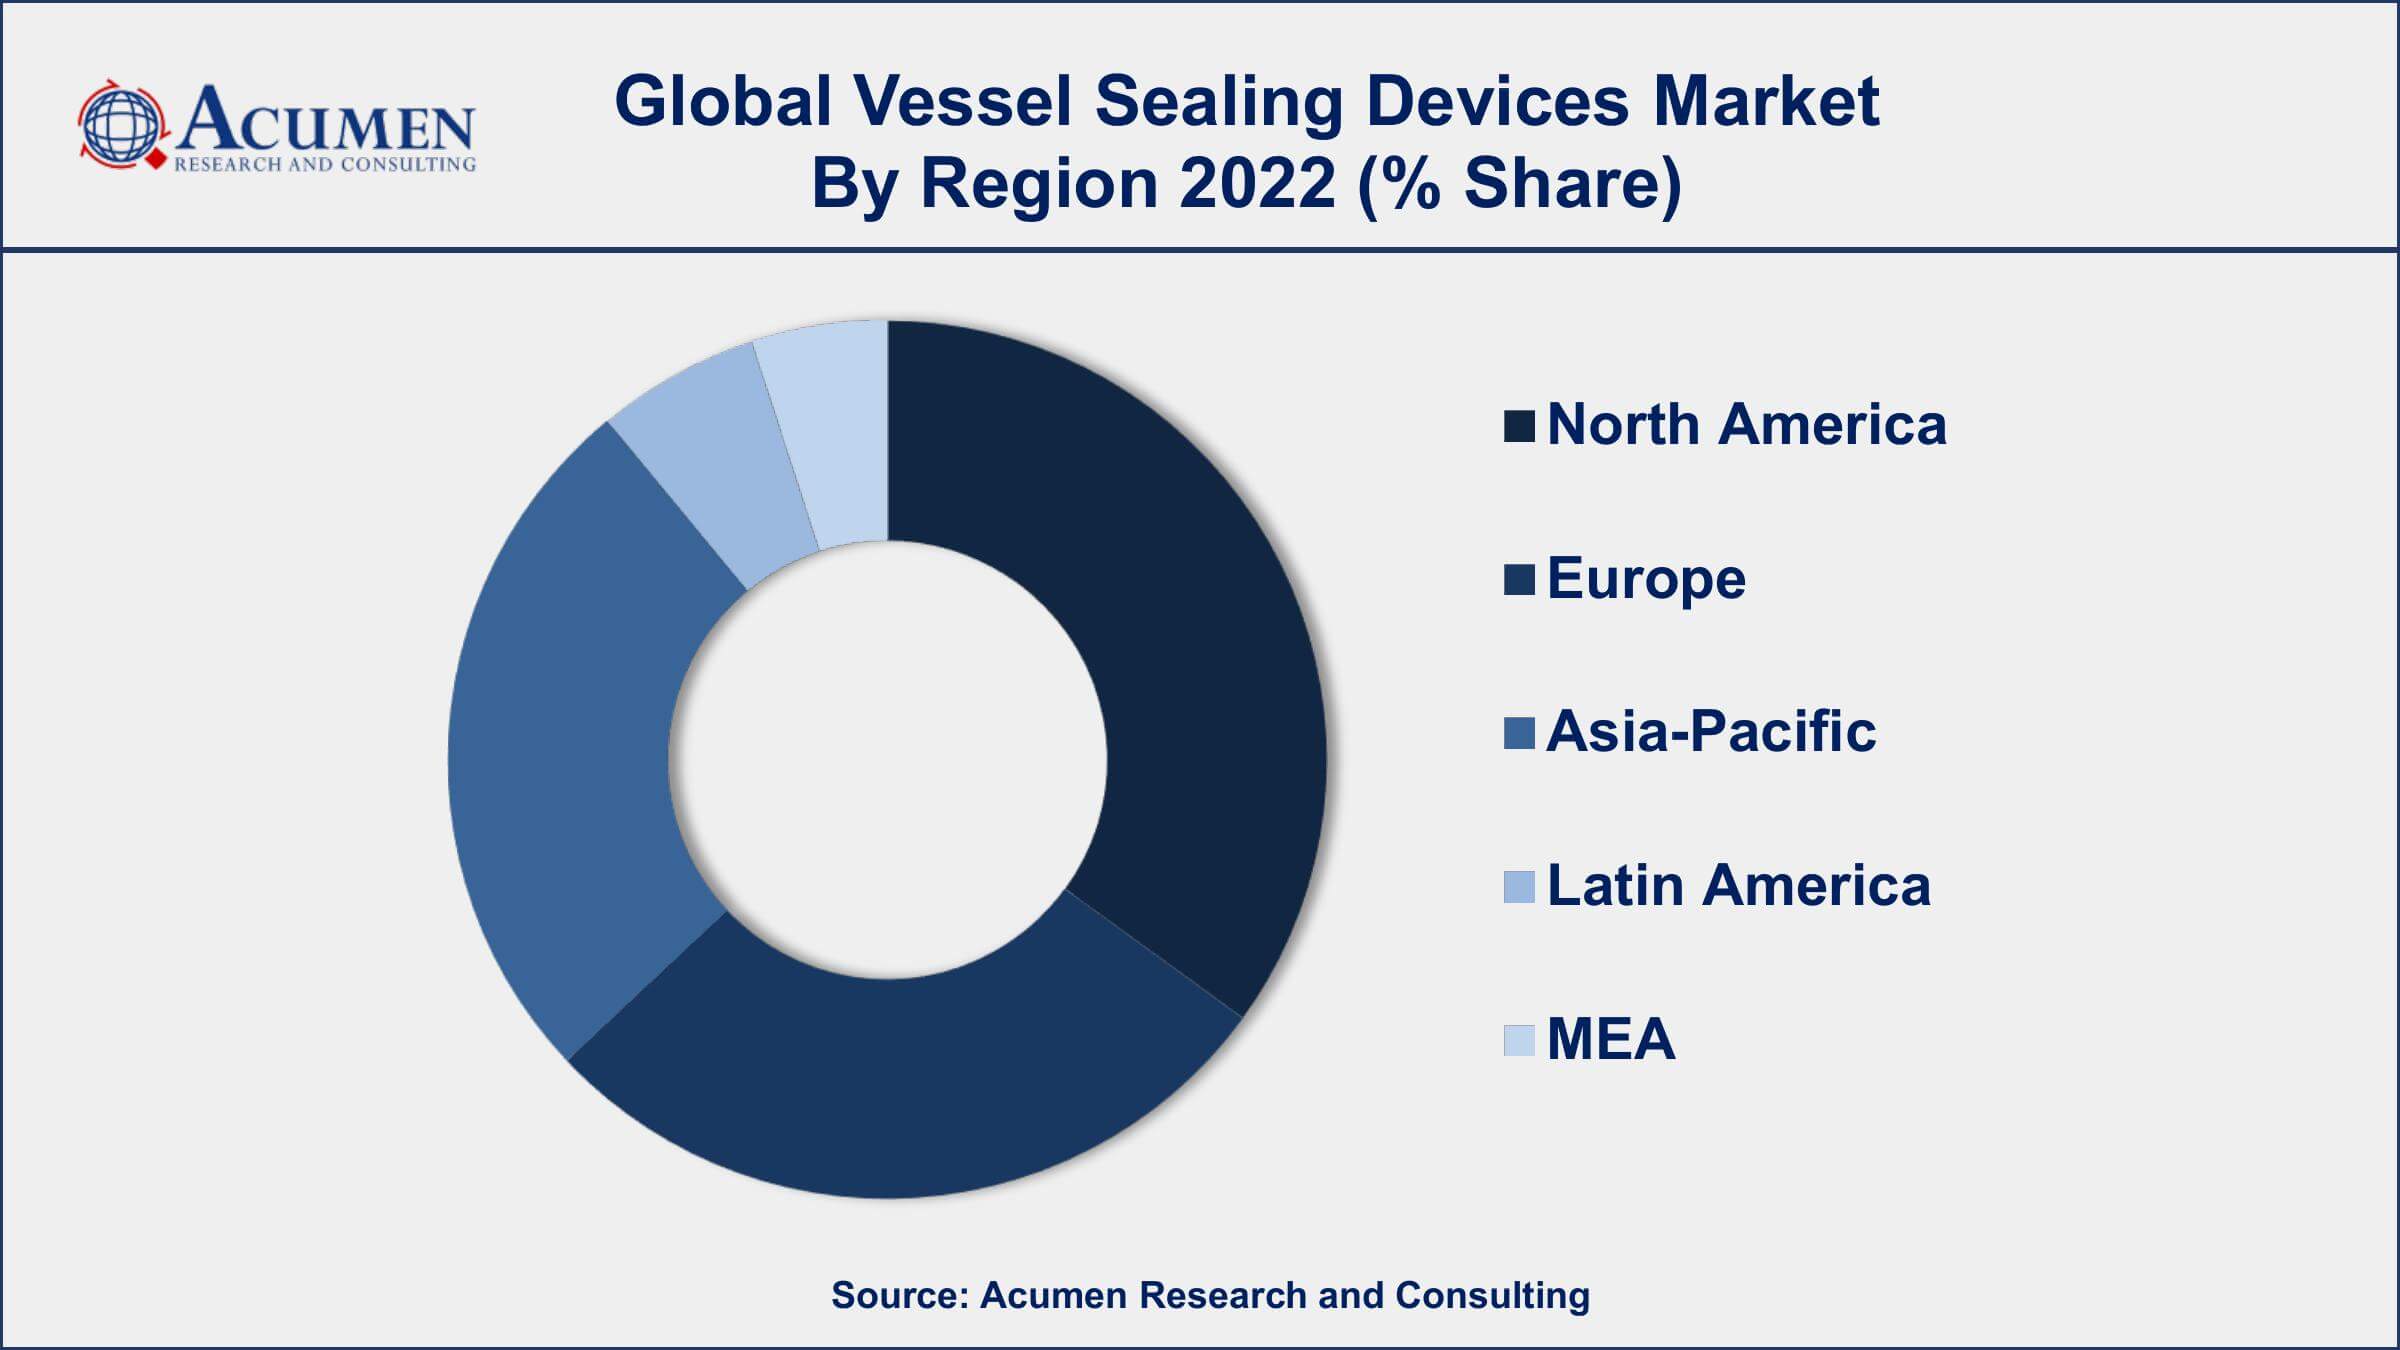 Vessel Sealing Devices Market Drivers